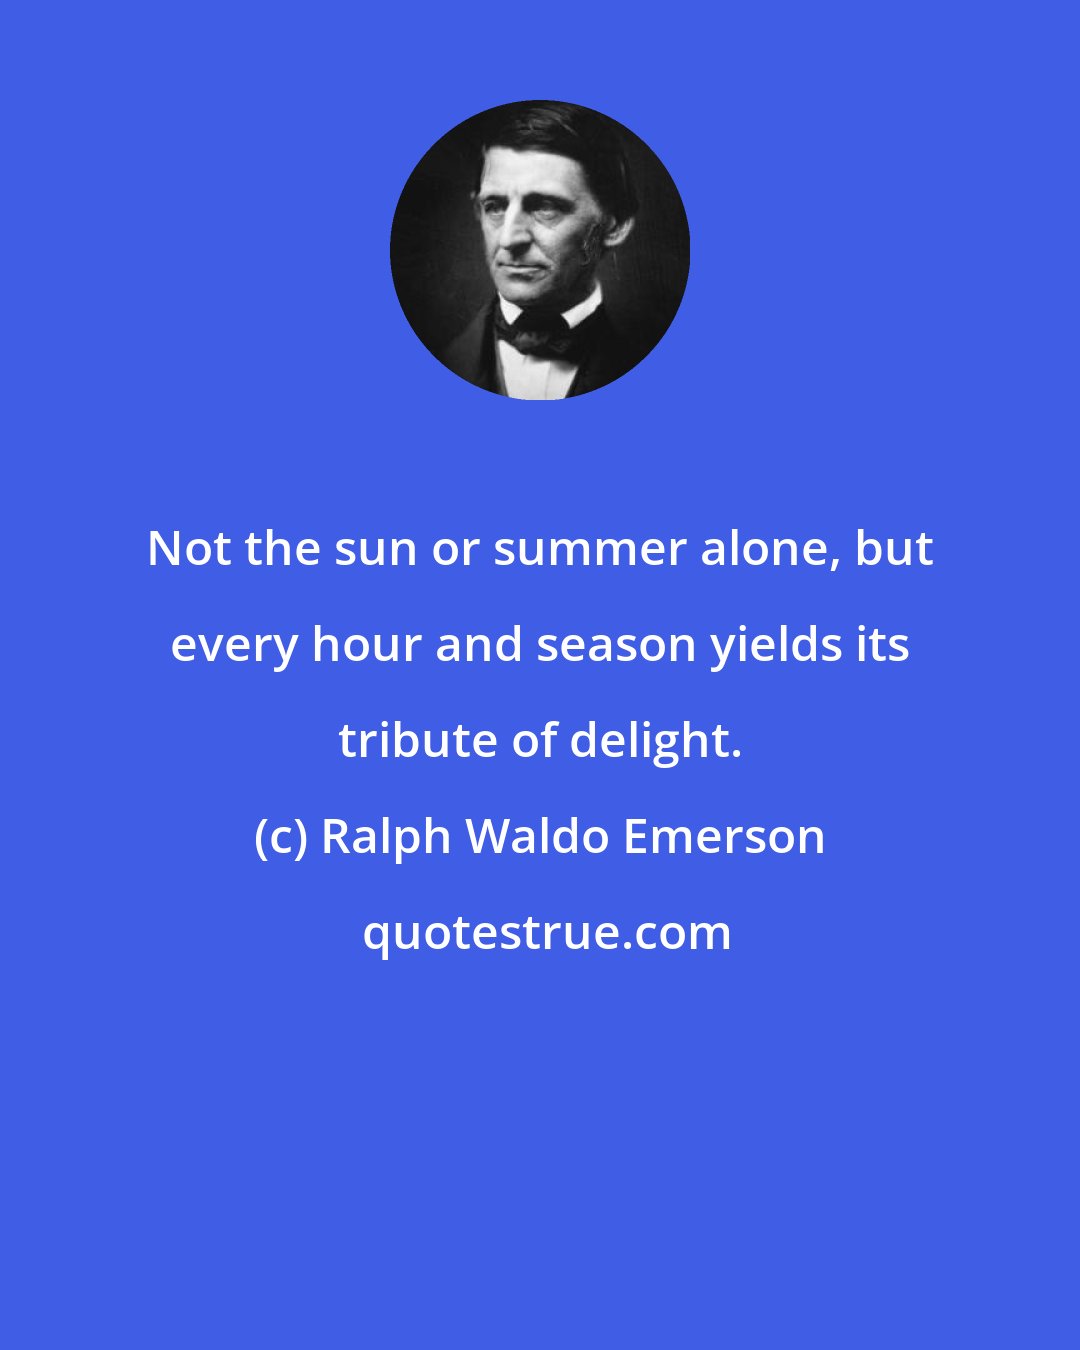 Ralph Waldo Emerson: Not the sun or summer alone, but every hour and season yields its tribute of delight.